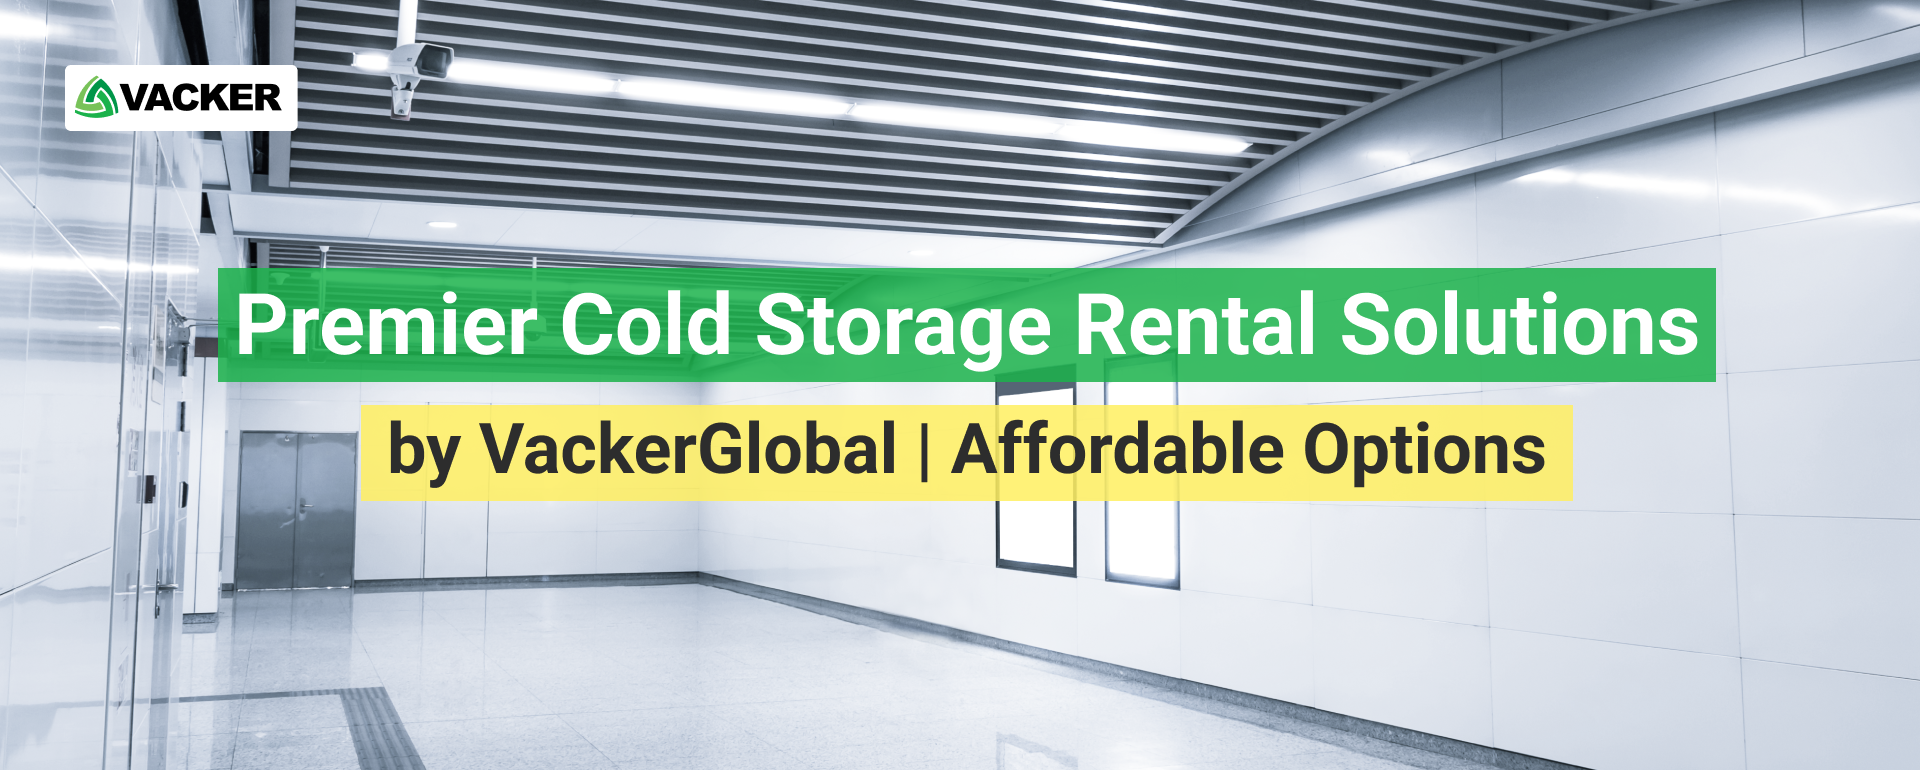 Premier Cold Storage Rental Solutions by VackerGlobal | Affordable Options